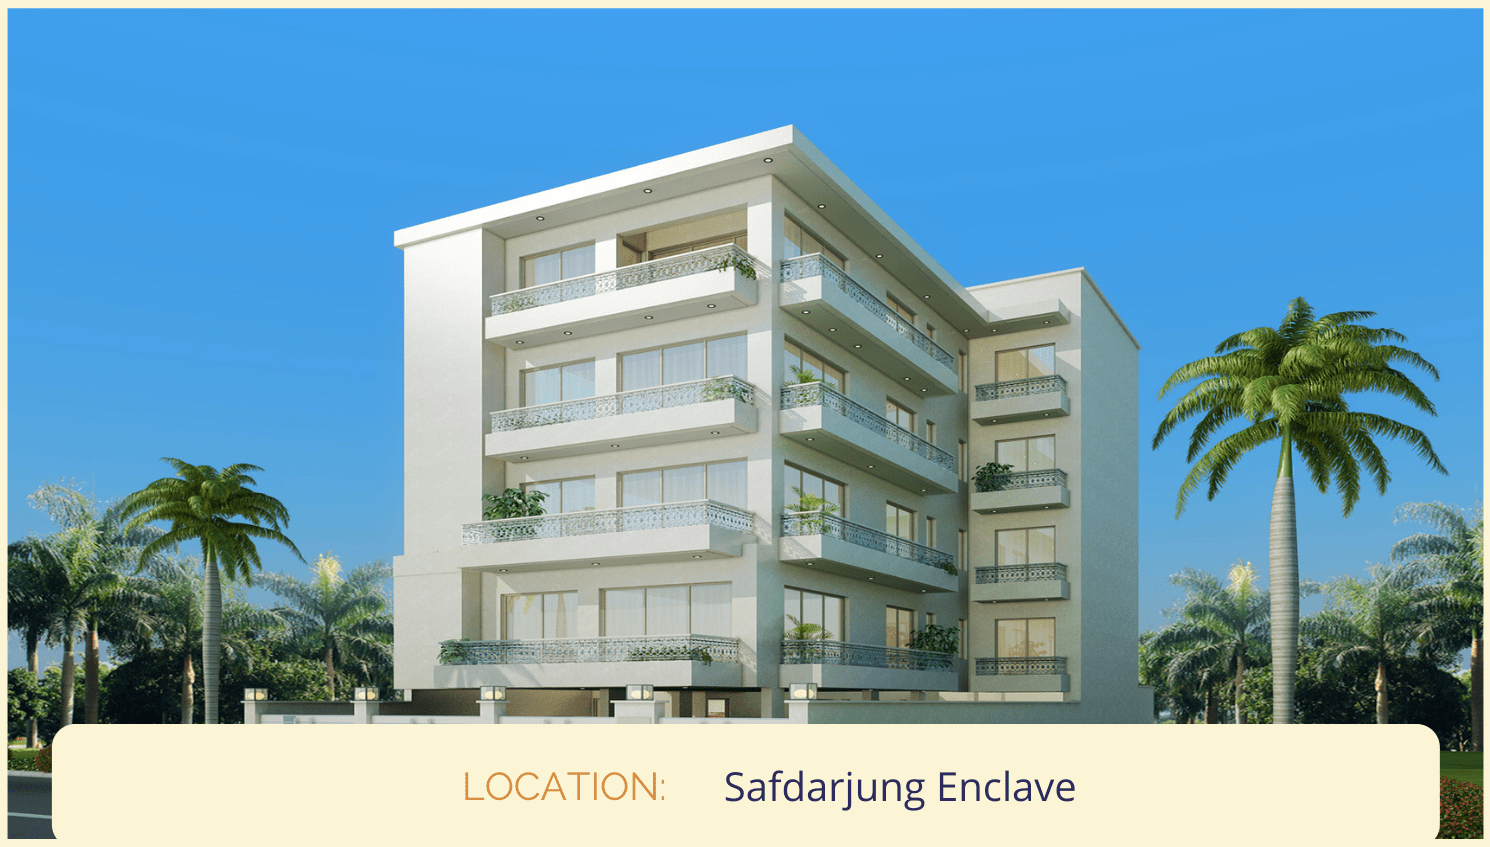 Beautifuly designed building by florence homes in safdarjung enclave